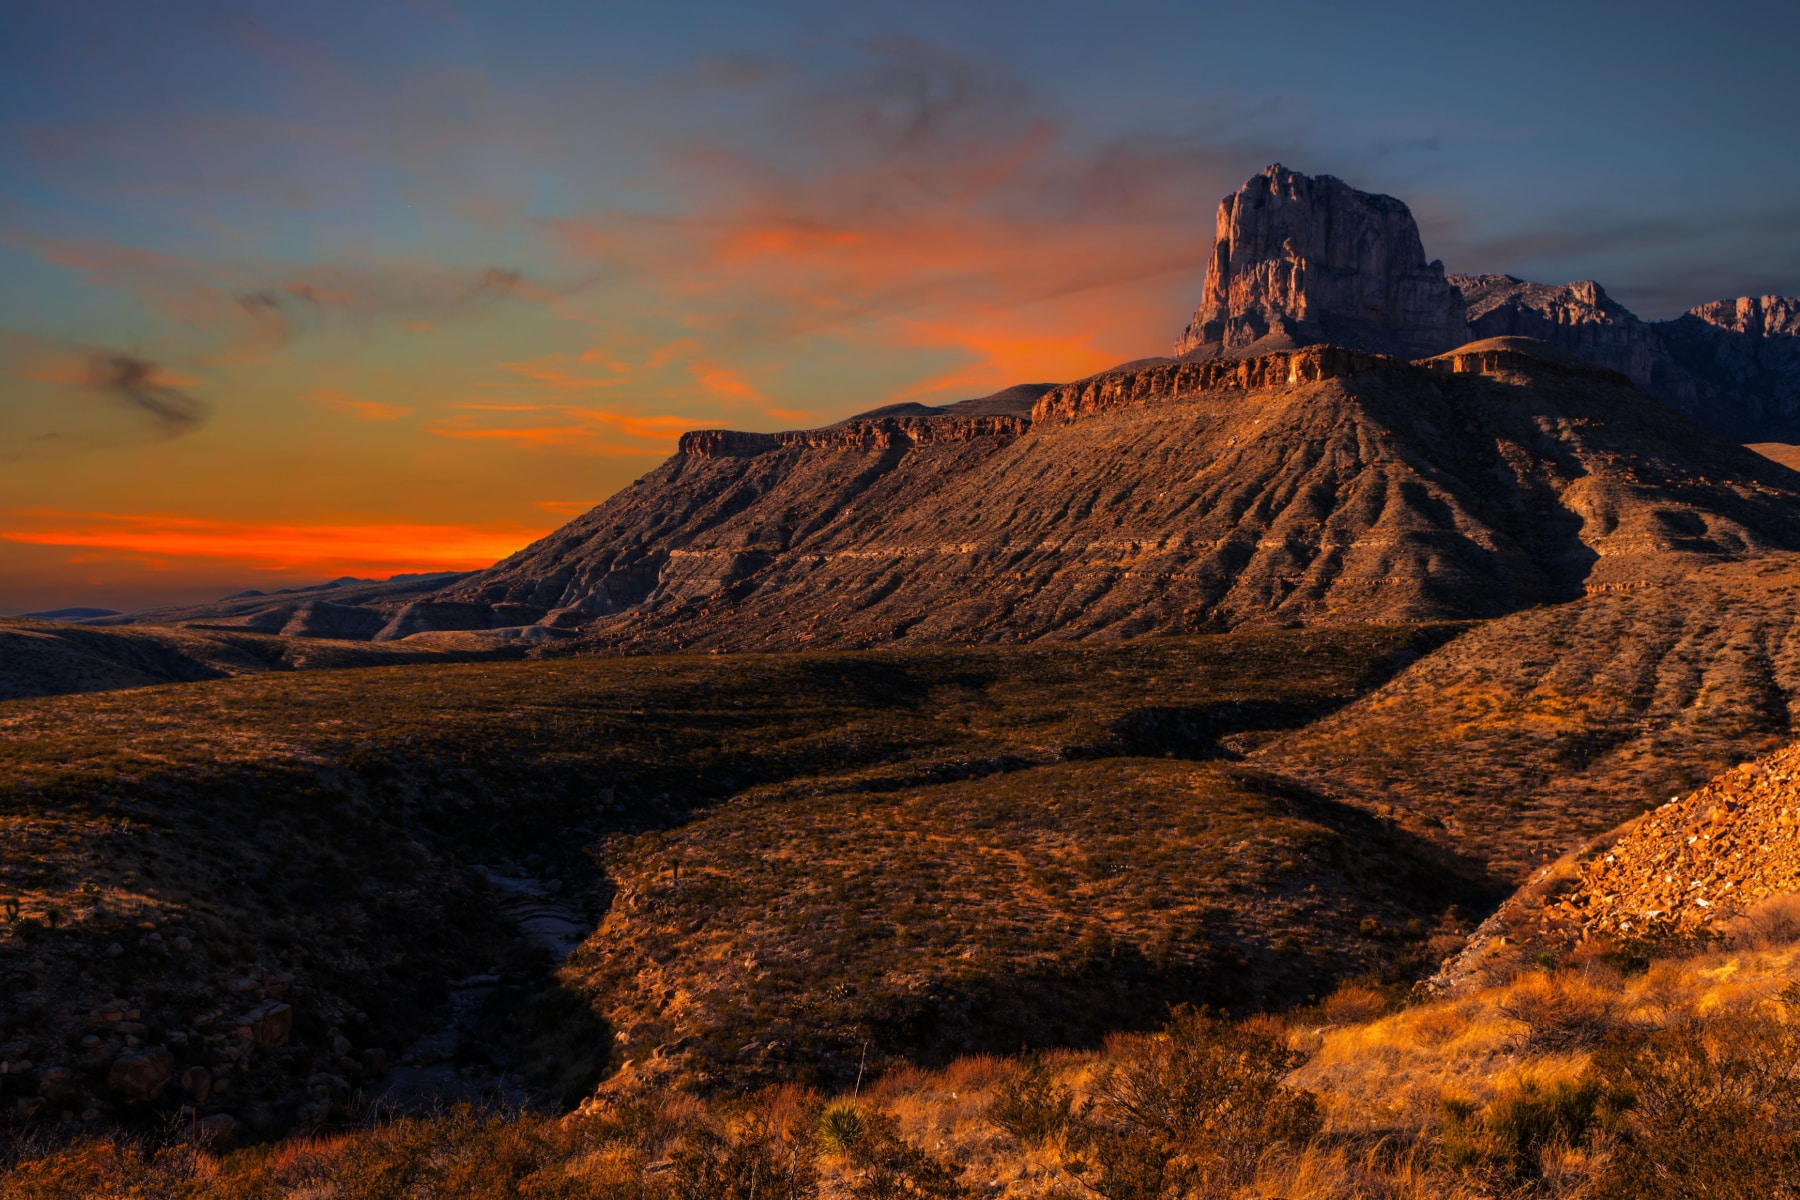 Guadalupe Mountains at sunset with El Capitan poking above the Permian Reef.